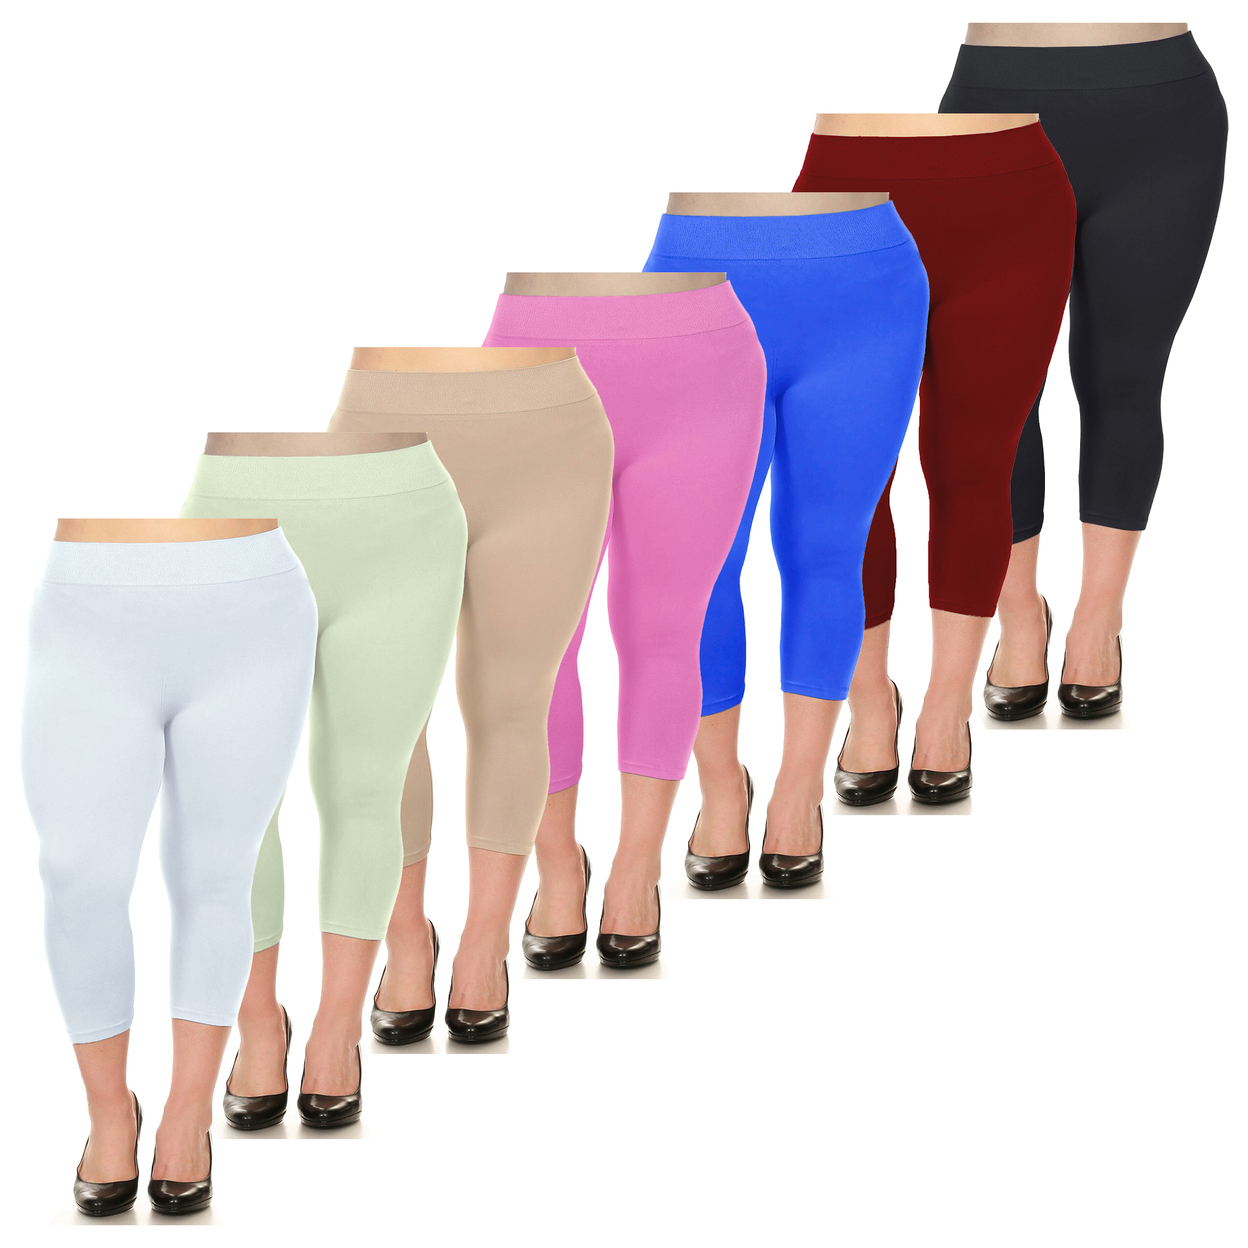 2-Pack: Women's Ultra-Soft High Waisted Smooth Stretch Active Yoga Capri Leggings Plus Size Available - Red & Red, 3x